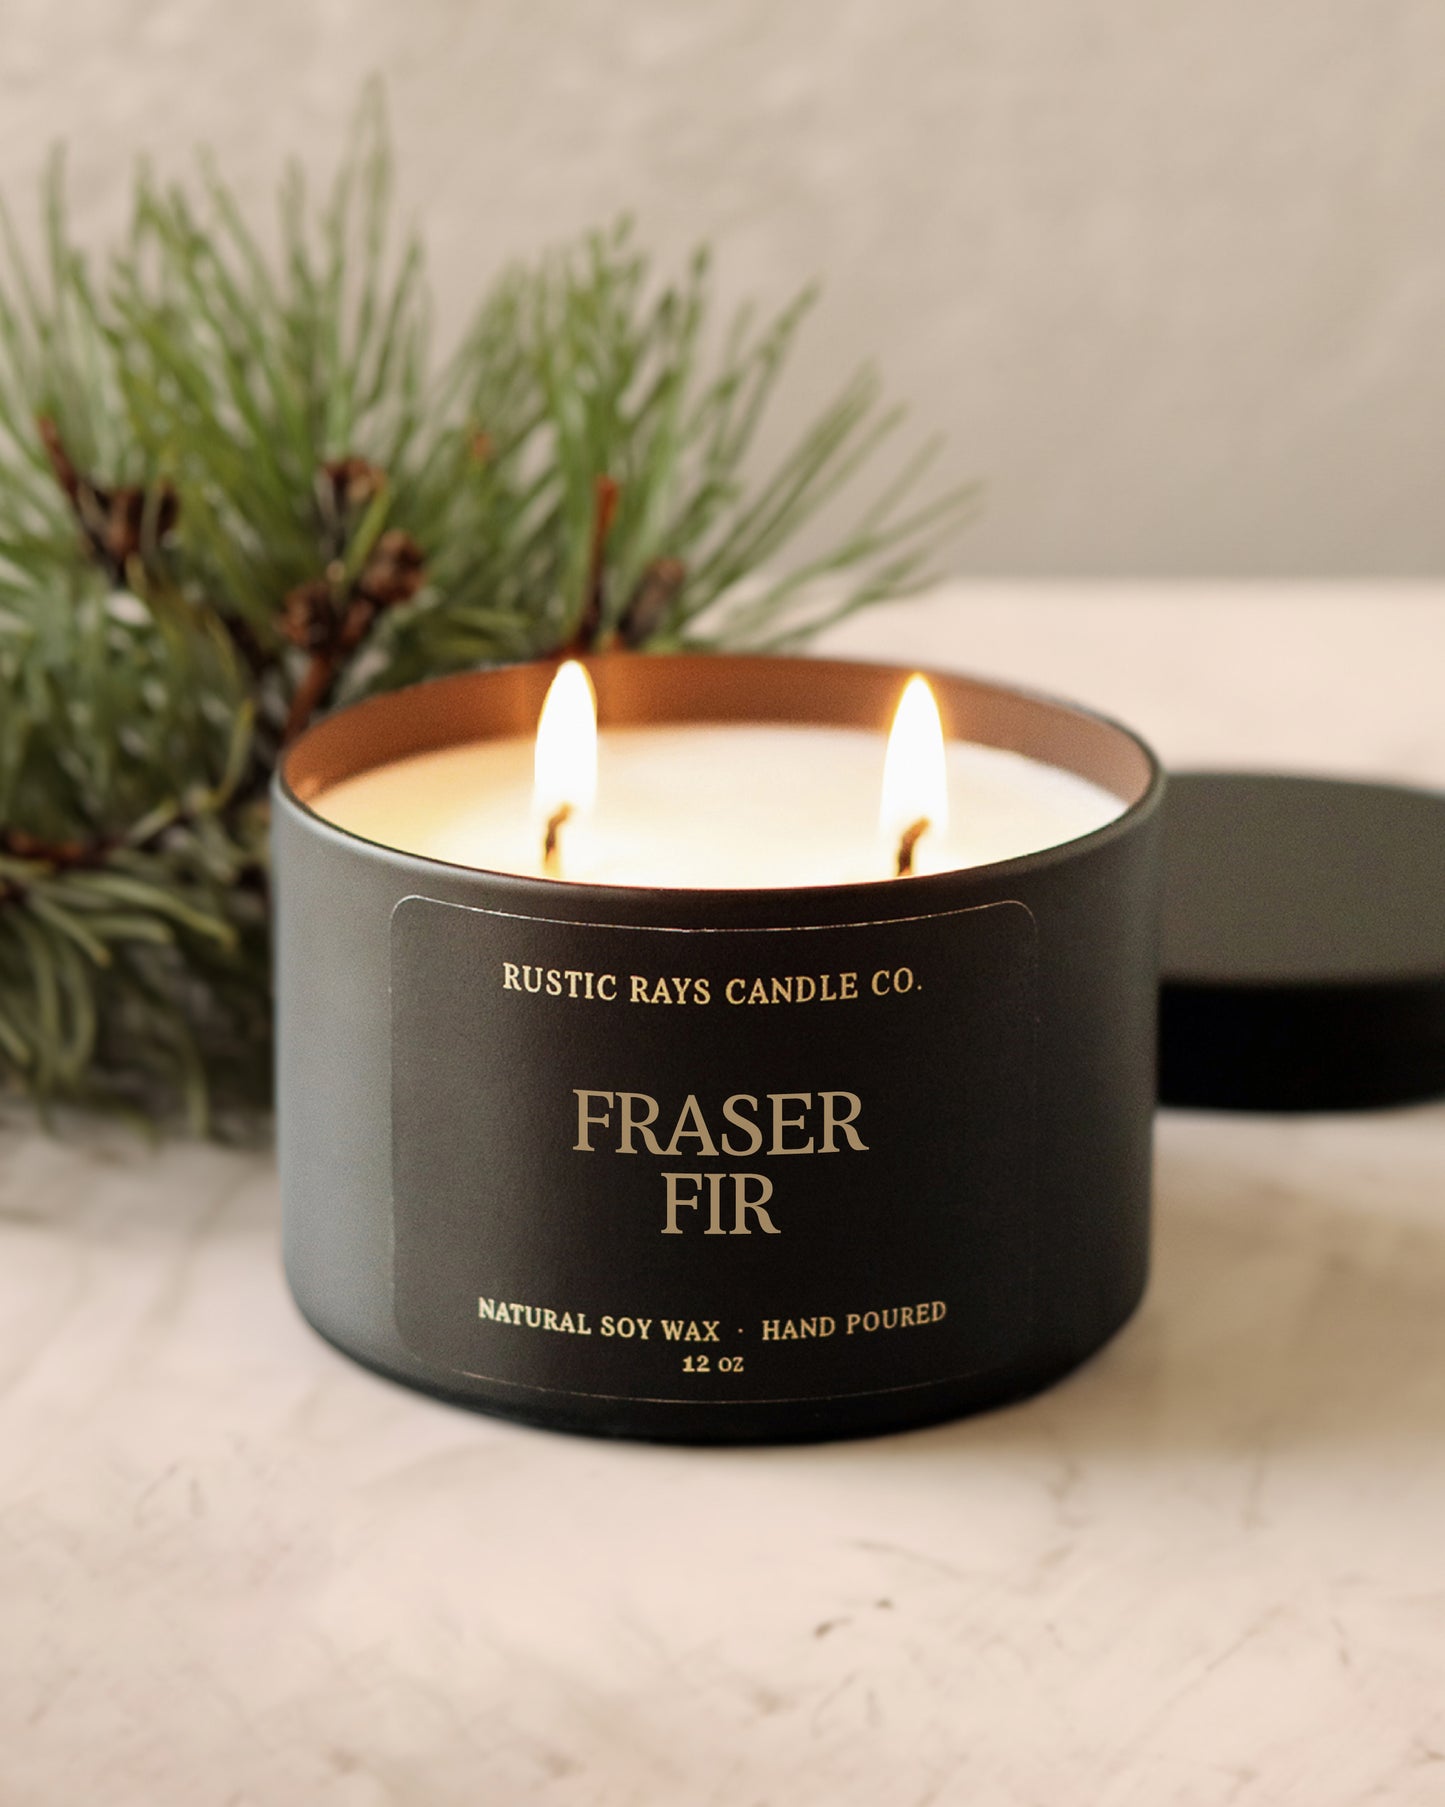 Pine Scented Candle - Soy Candle - Fraser Fir Candle